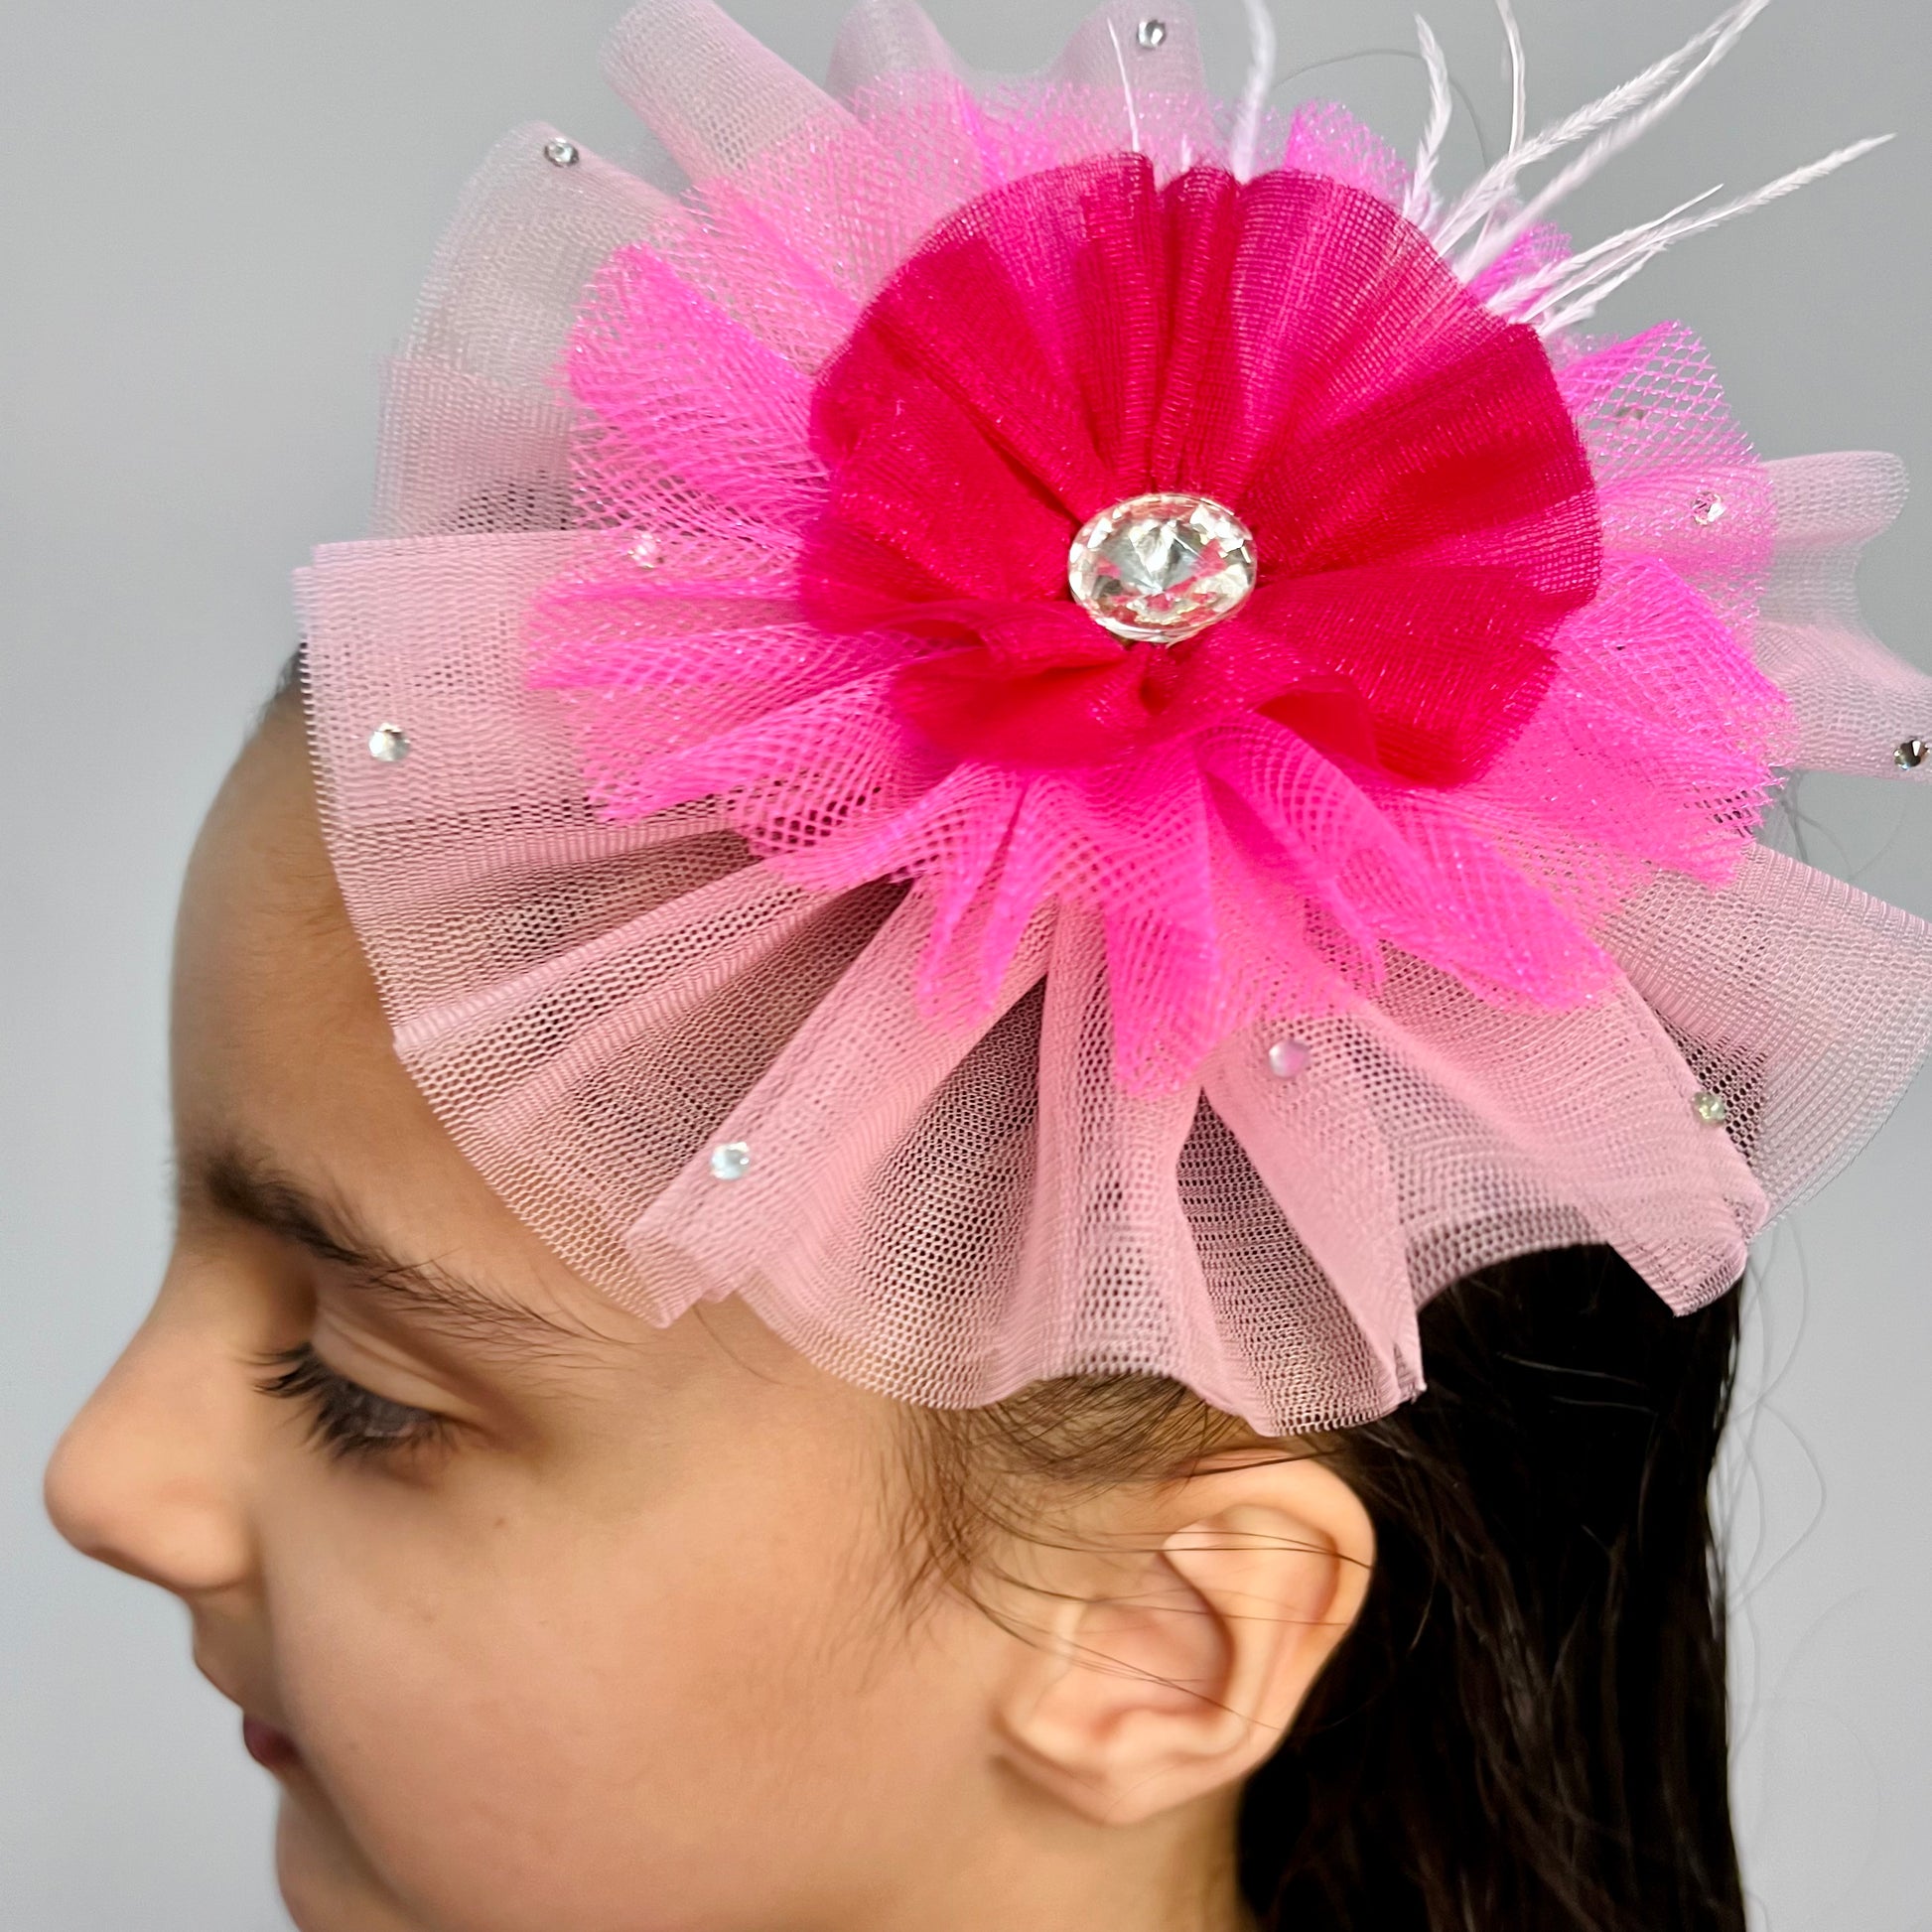 POMPONETTE Pink Fascinator | Multiple Shades Hair Accessories